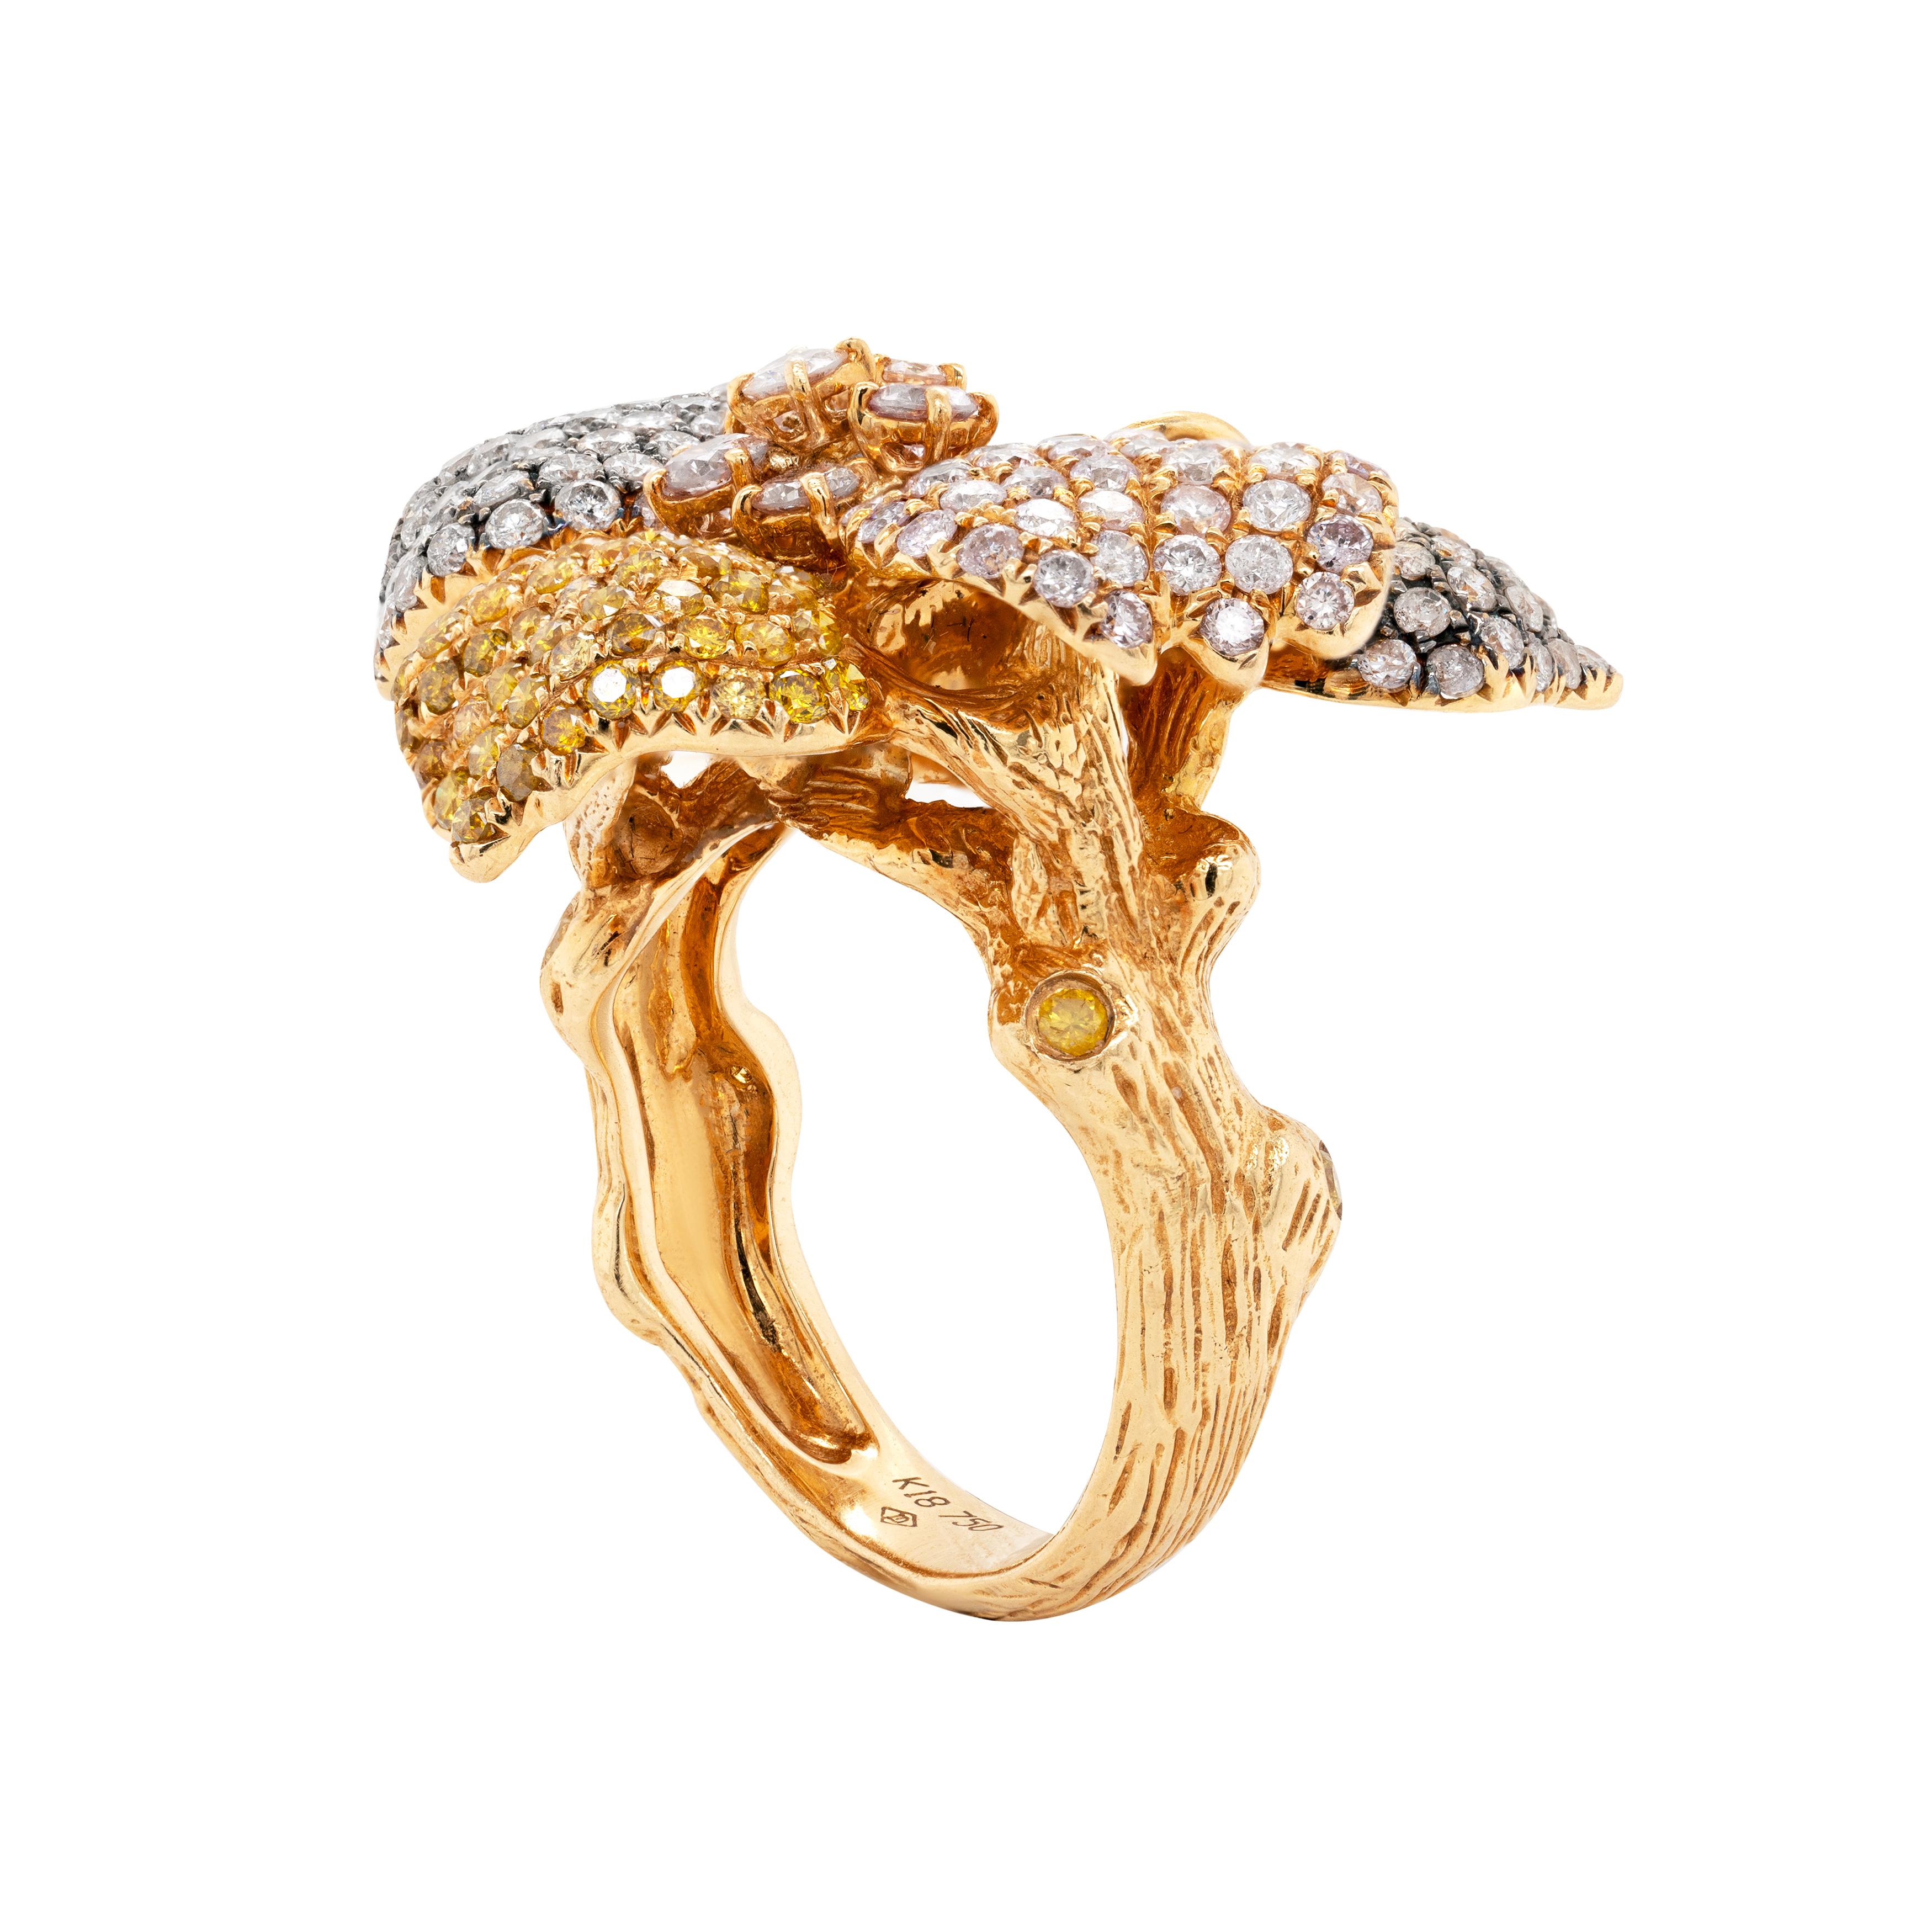 This spectacular cocktail ring showcases an intricate bloom orchid motif primarily crafted from 18 carat rose gold with white gold accents on two petals. The use of two-tone gold adds depth and dimension to the special ring whose petals are